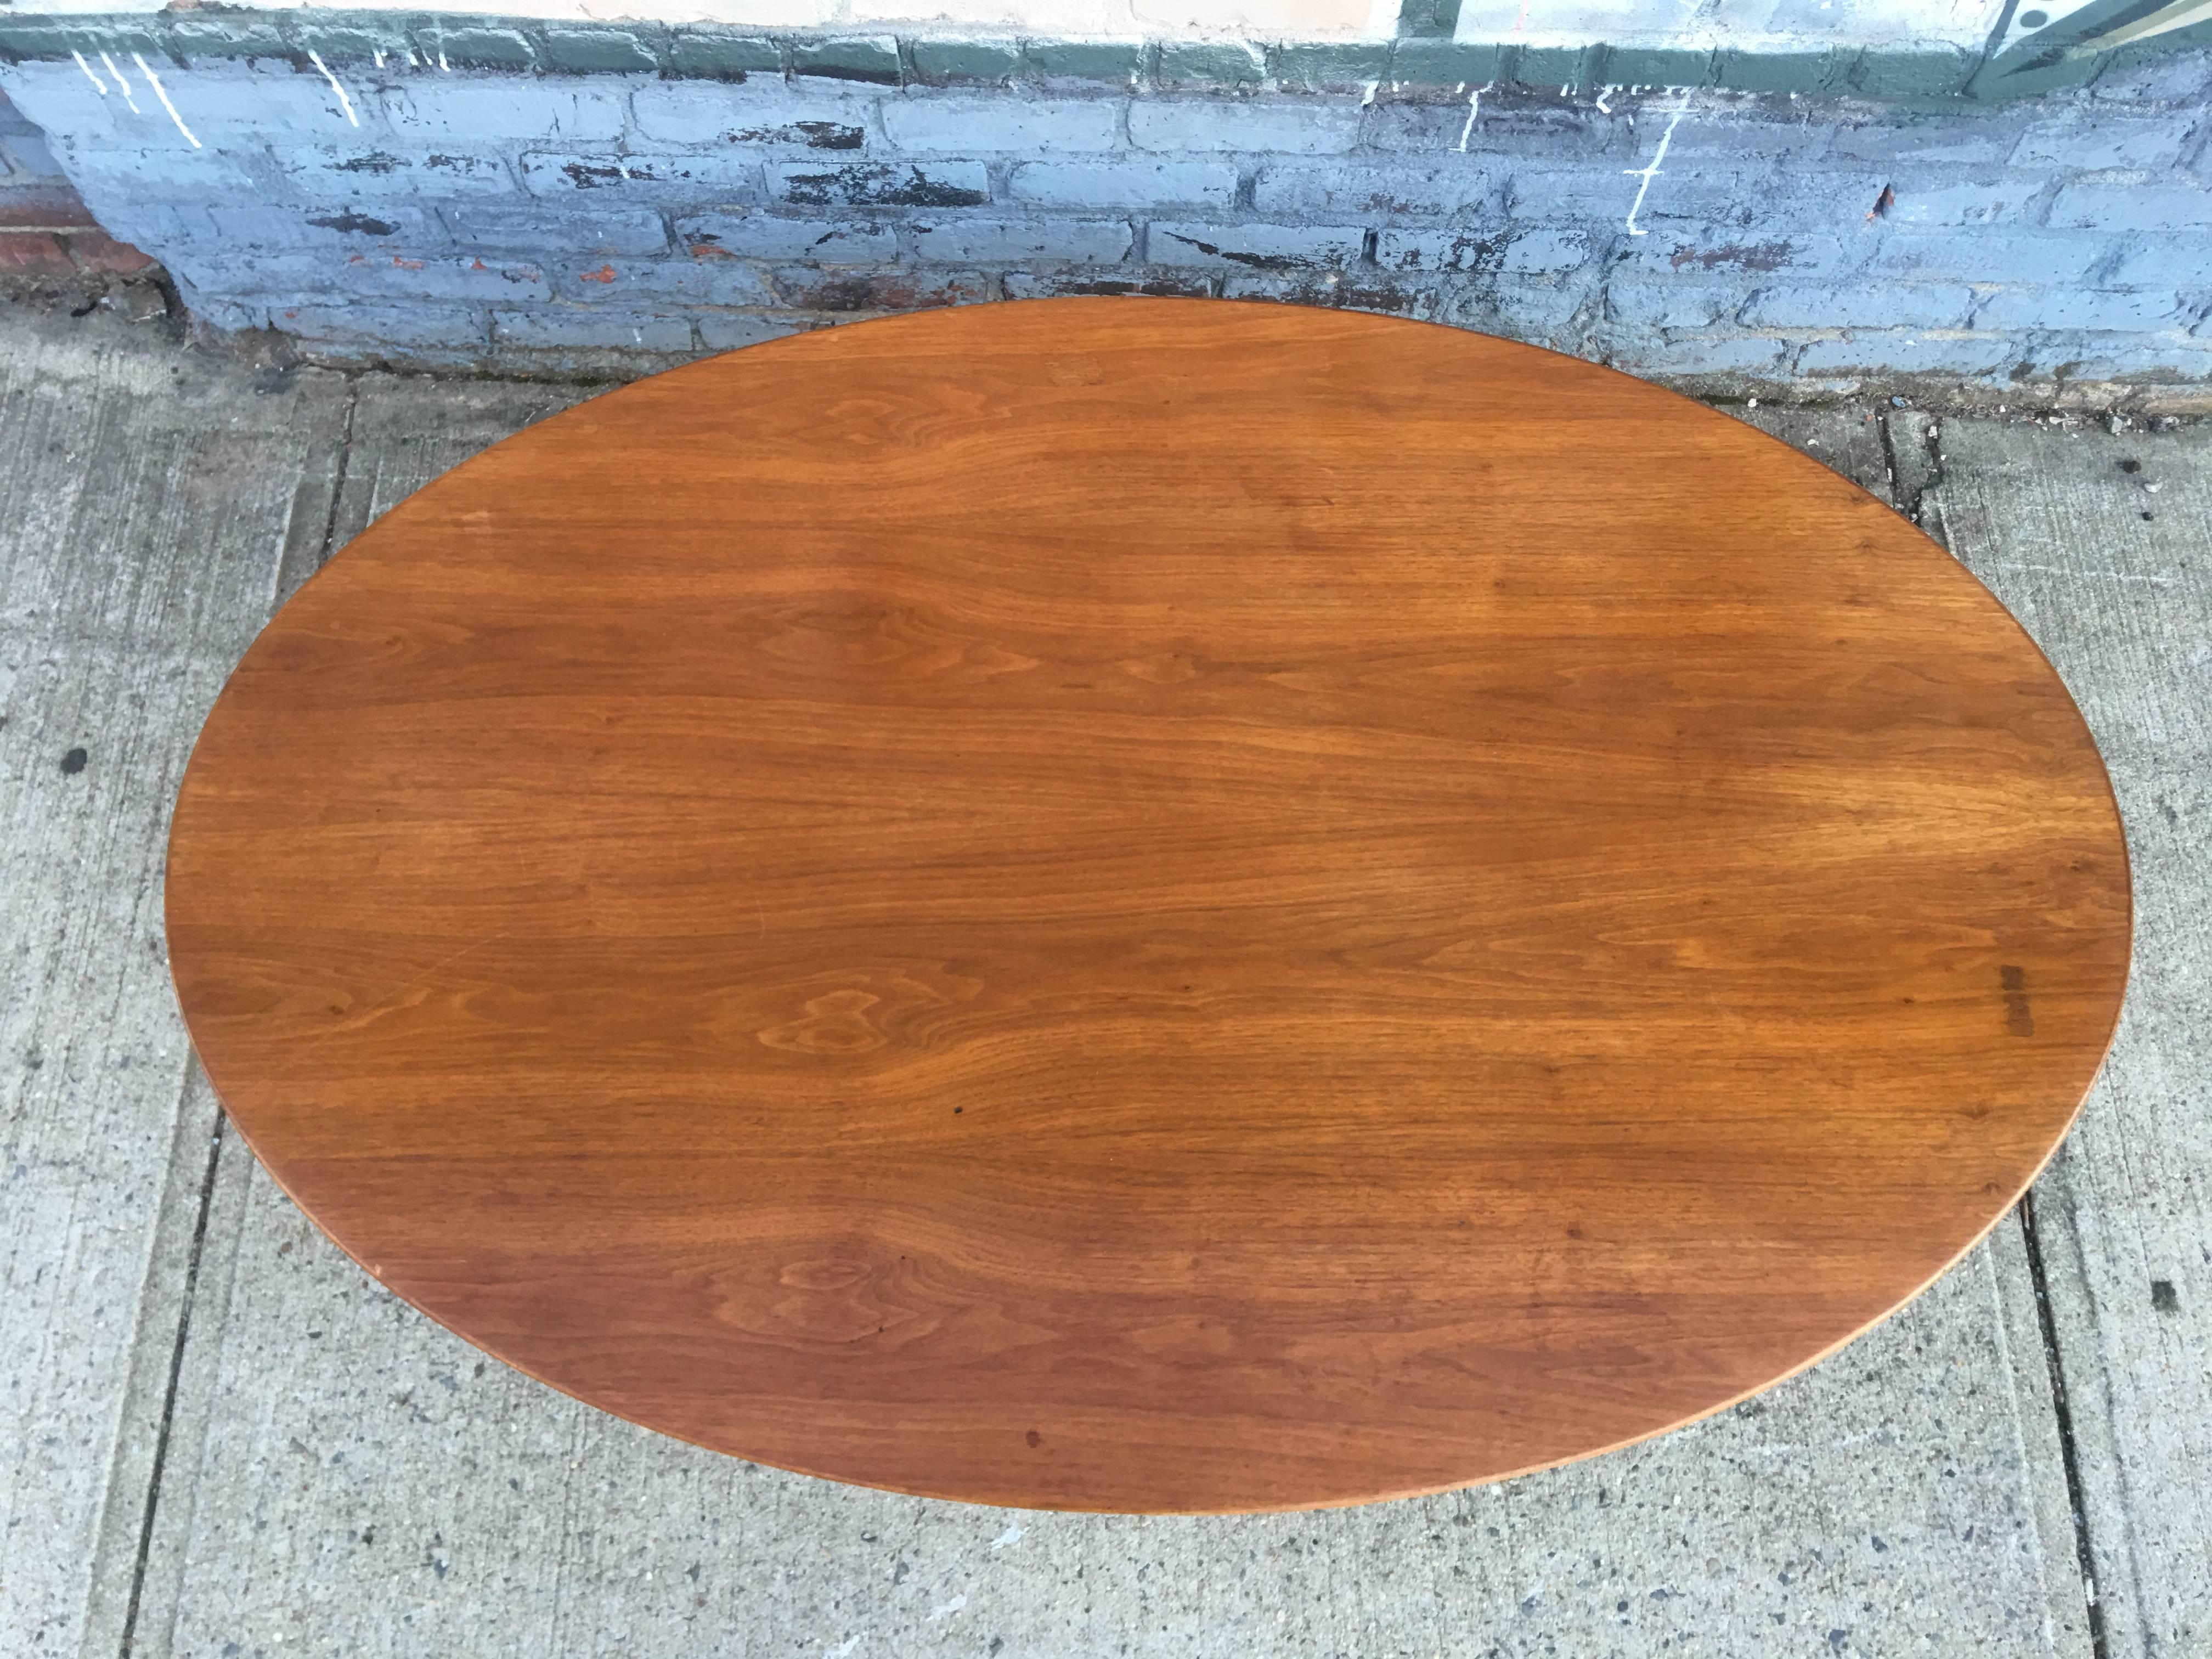 Oval Eero Saarinen coffee table for Knoll. Walnut top. Wood in excellent original condition with no major flaws or wood loss. Base with normal wear for age.